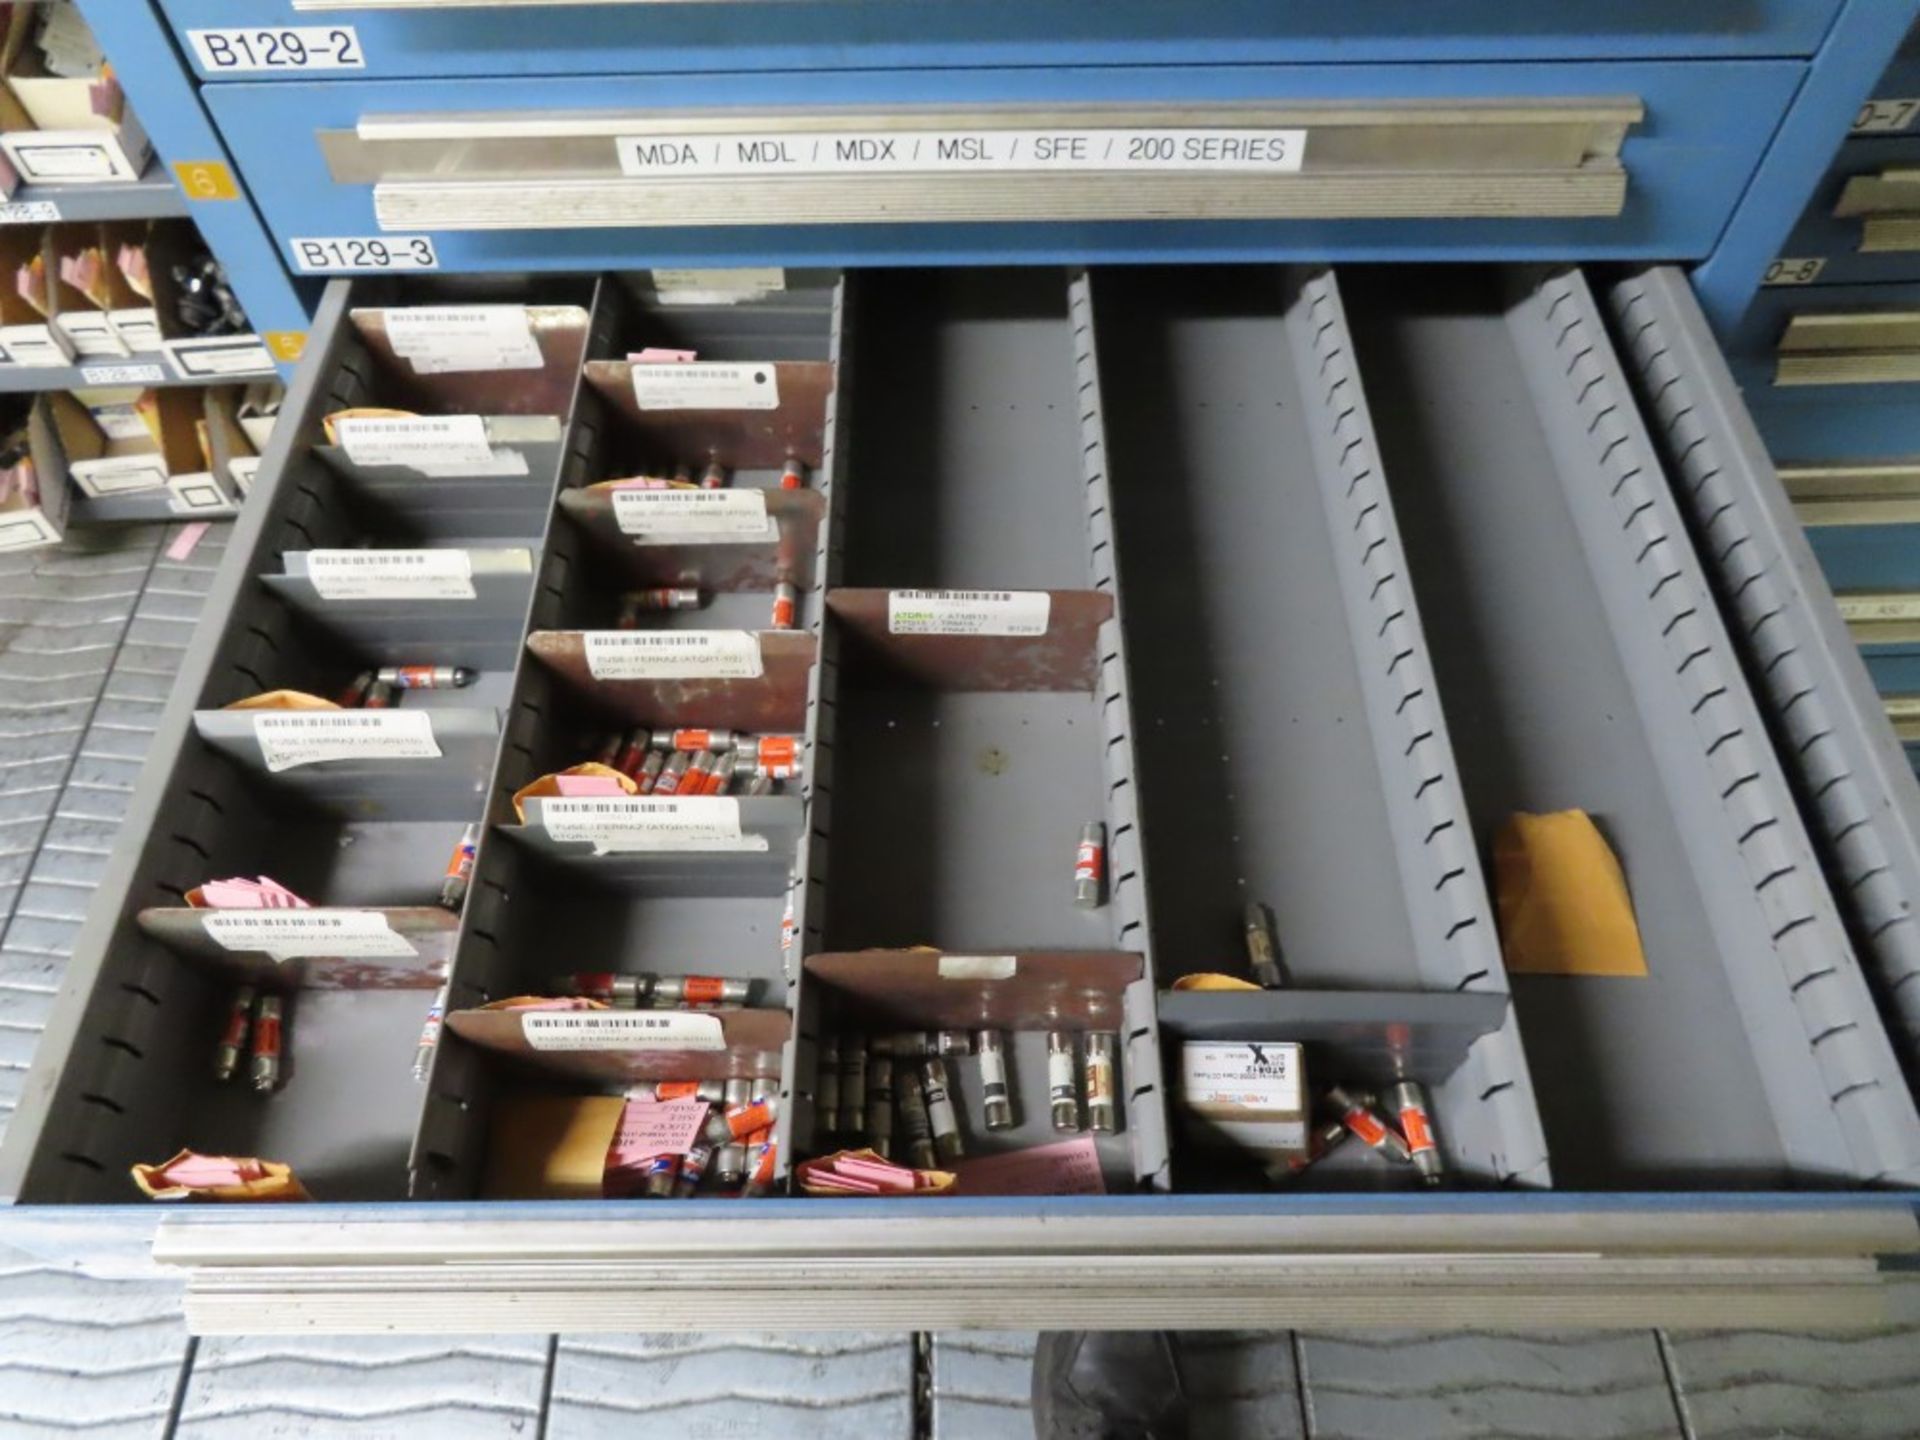 LYON 8-DRAWER LISTA STYLE CABINET W/ ASSORTED FUSES - Image 2 of 4